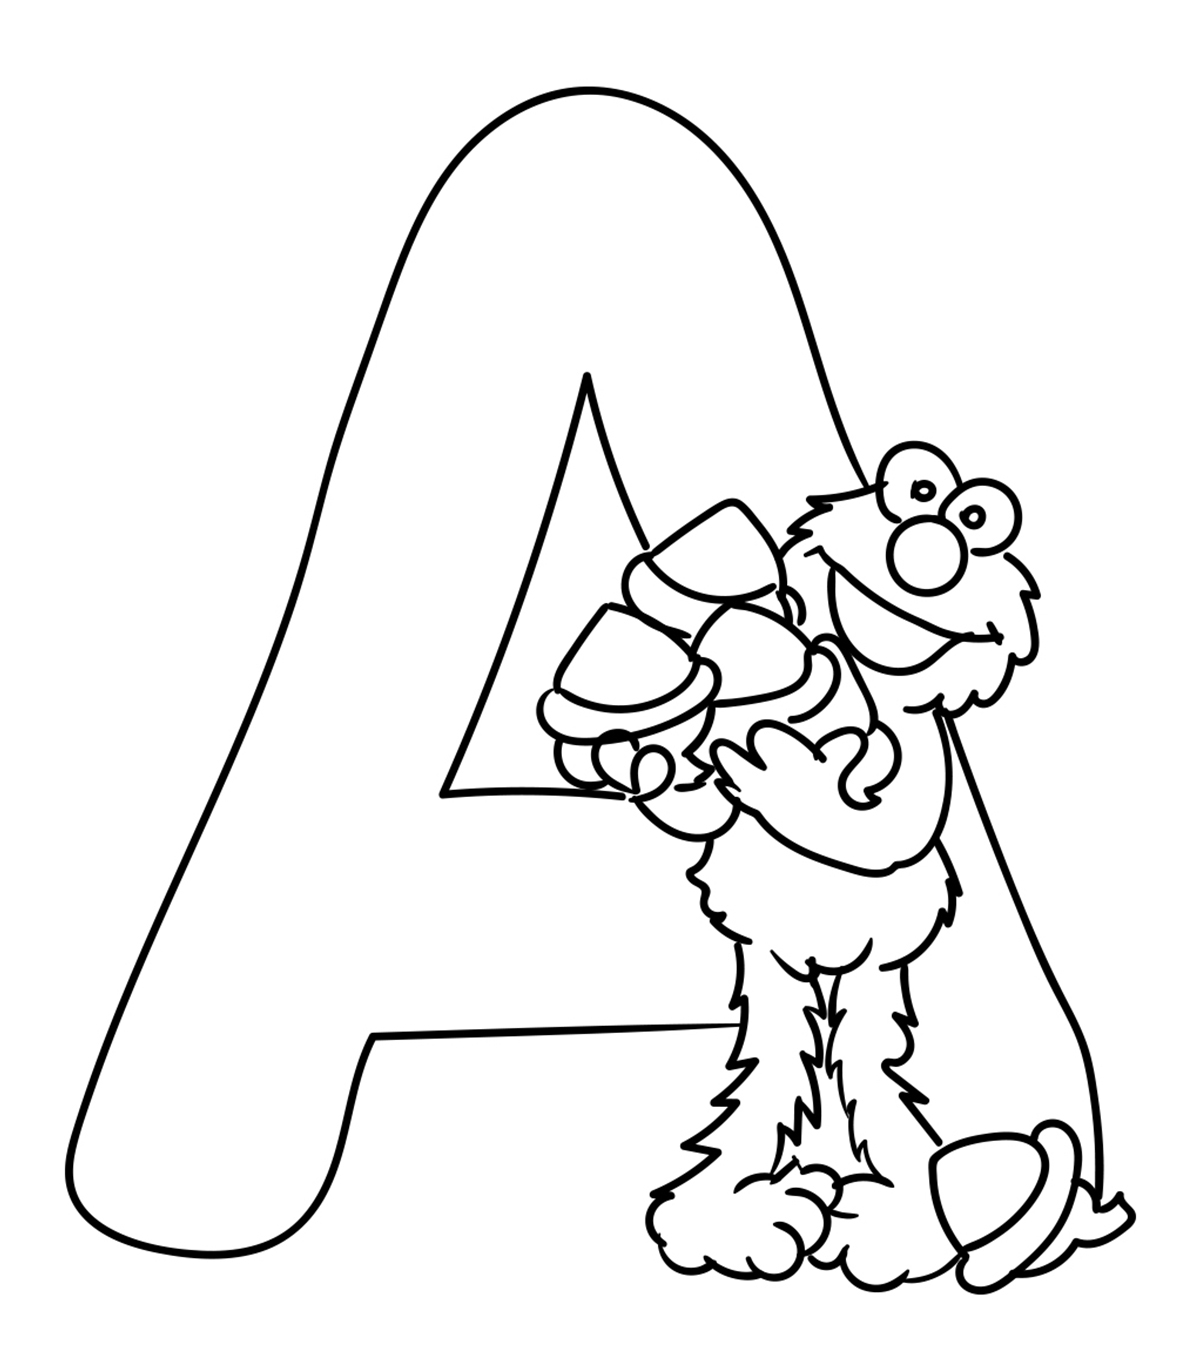 Top 10 Letter A Coloring Pages For Your Little Ones